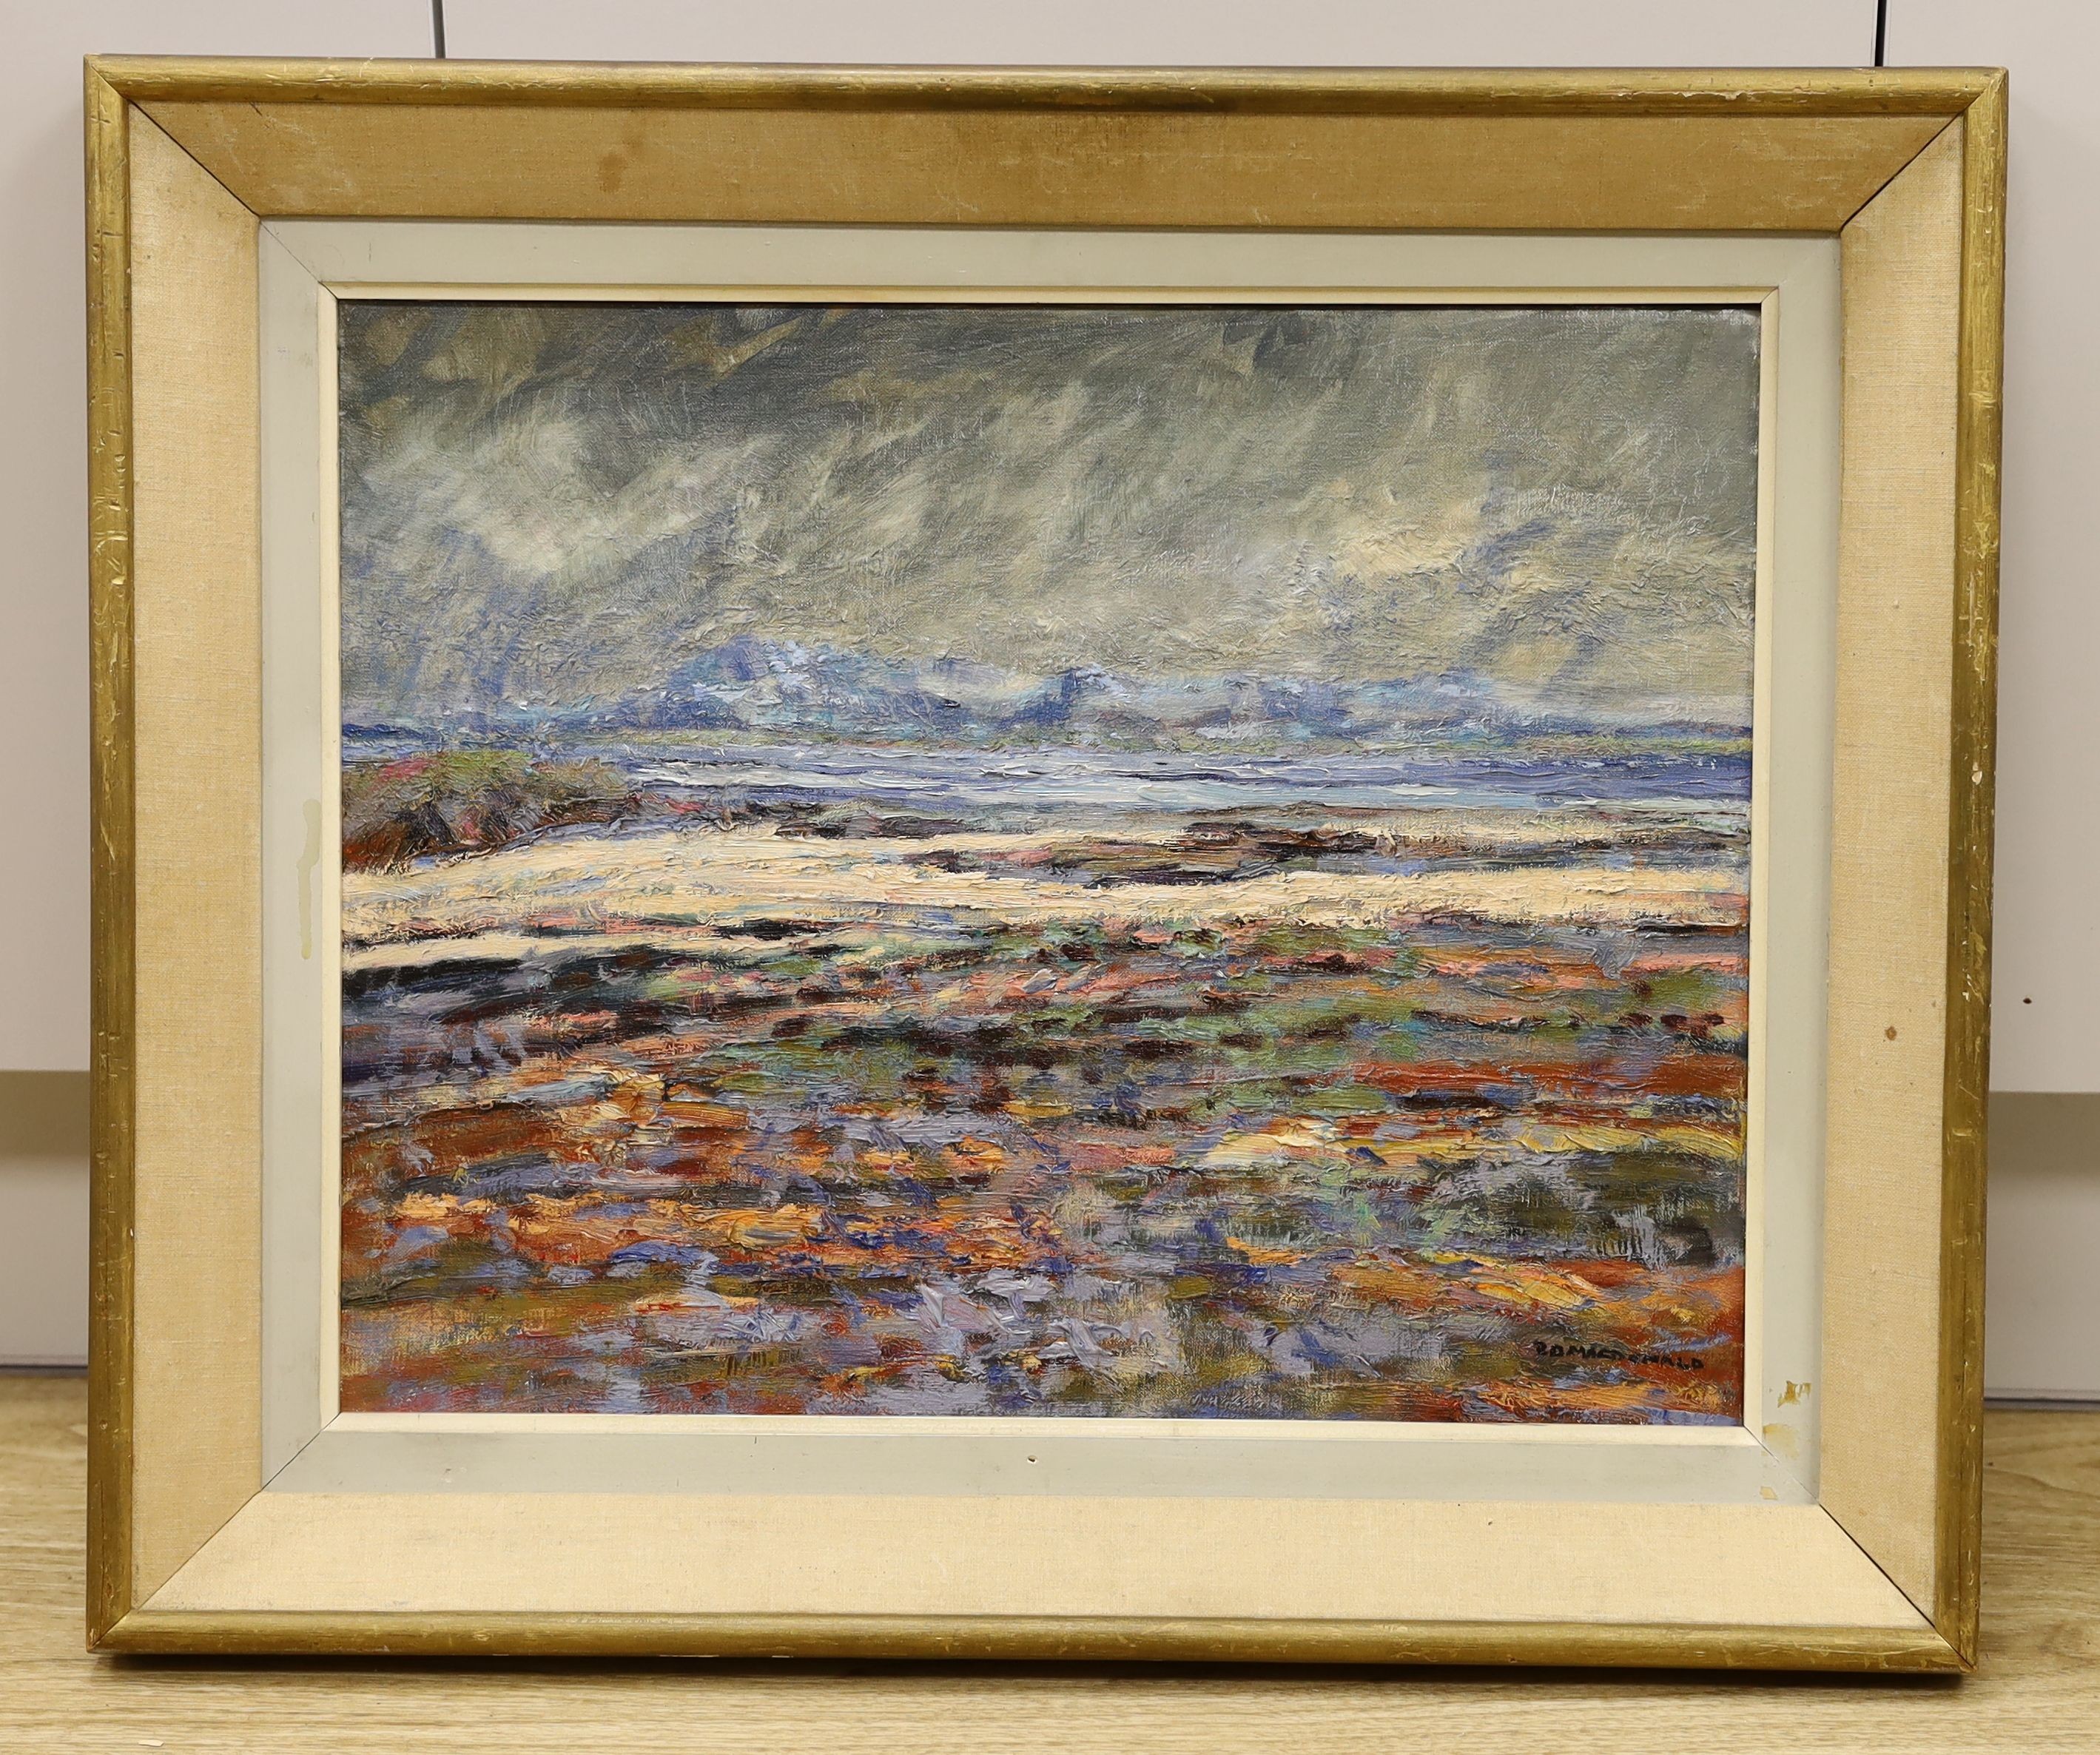 Sir Roderick Macdonald (1921-2001), oil on canvas, 'Low water, Loch Snizort, Skye', signed, 40 x 50cm